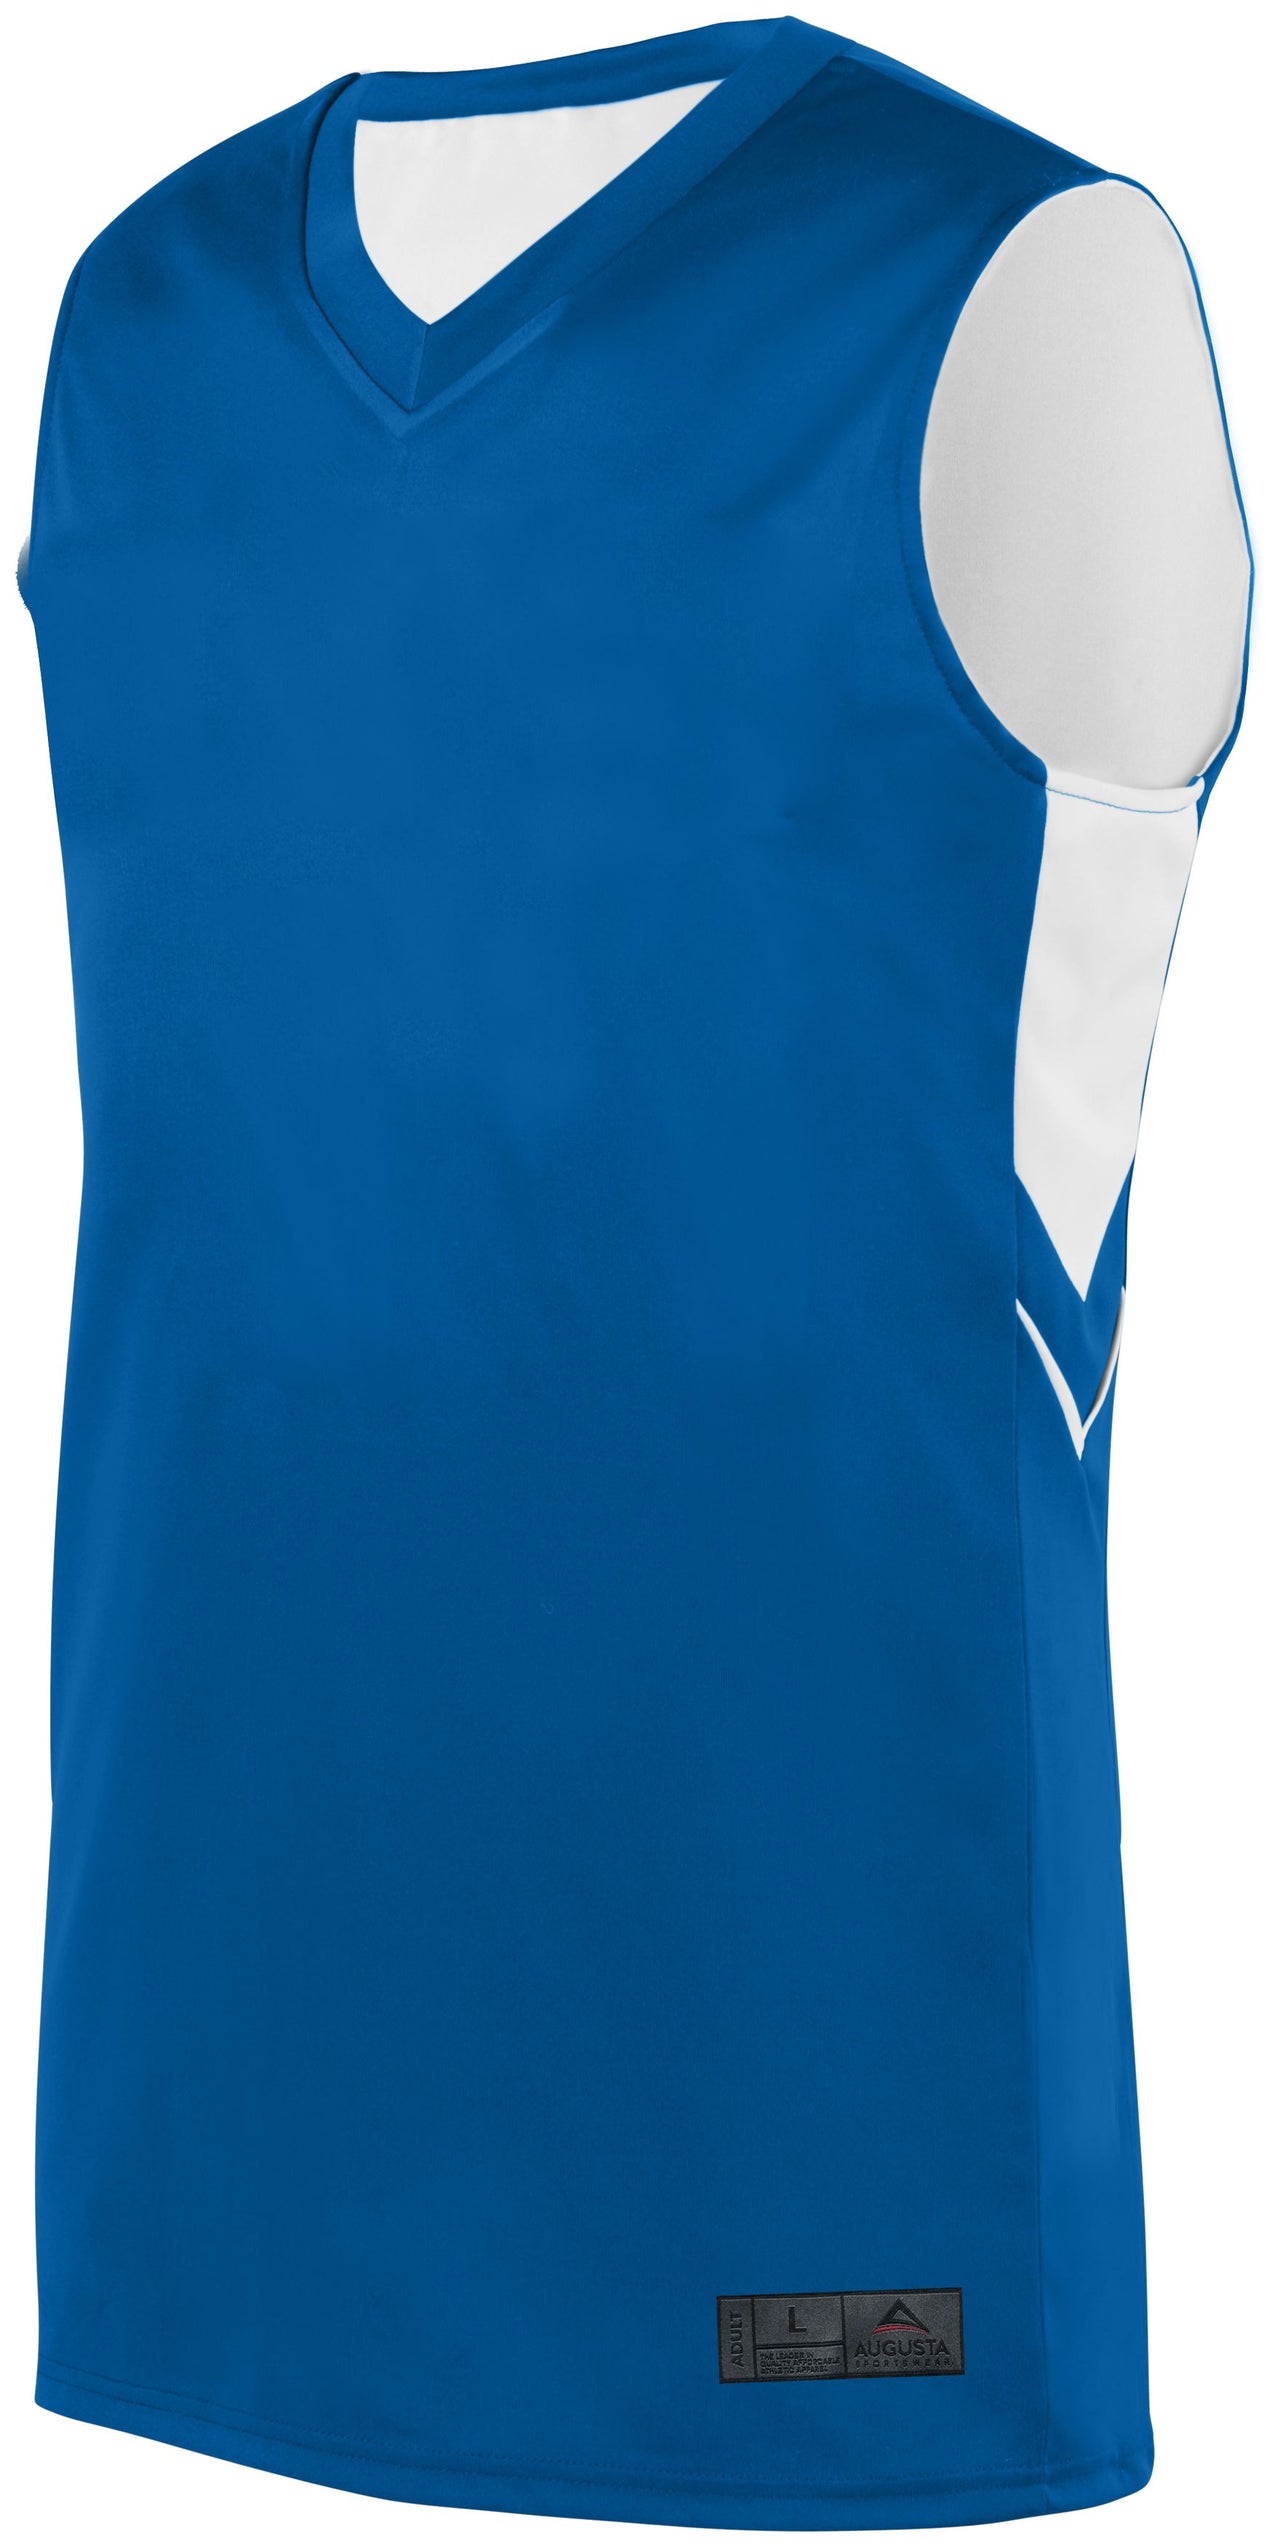 Youth Alley-Oop Reversible Jersey - 1167